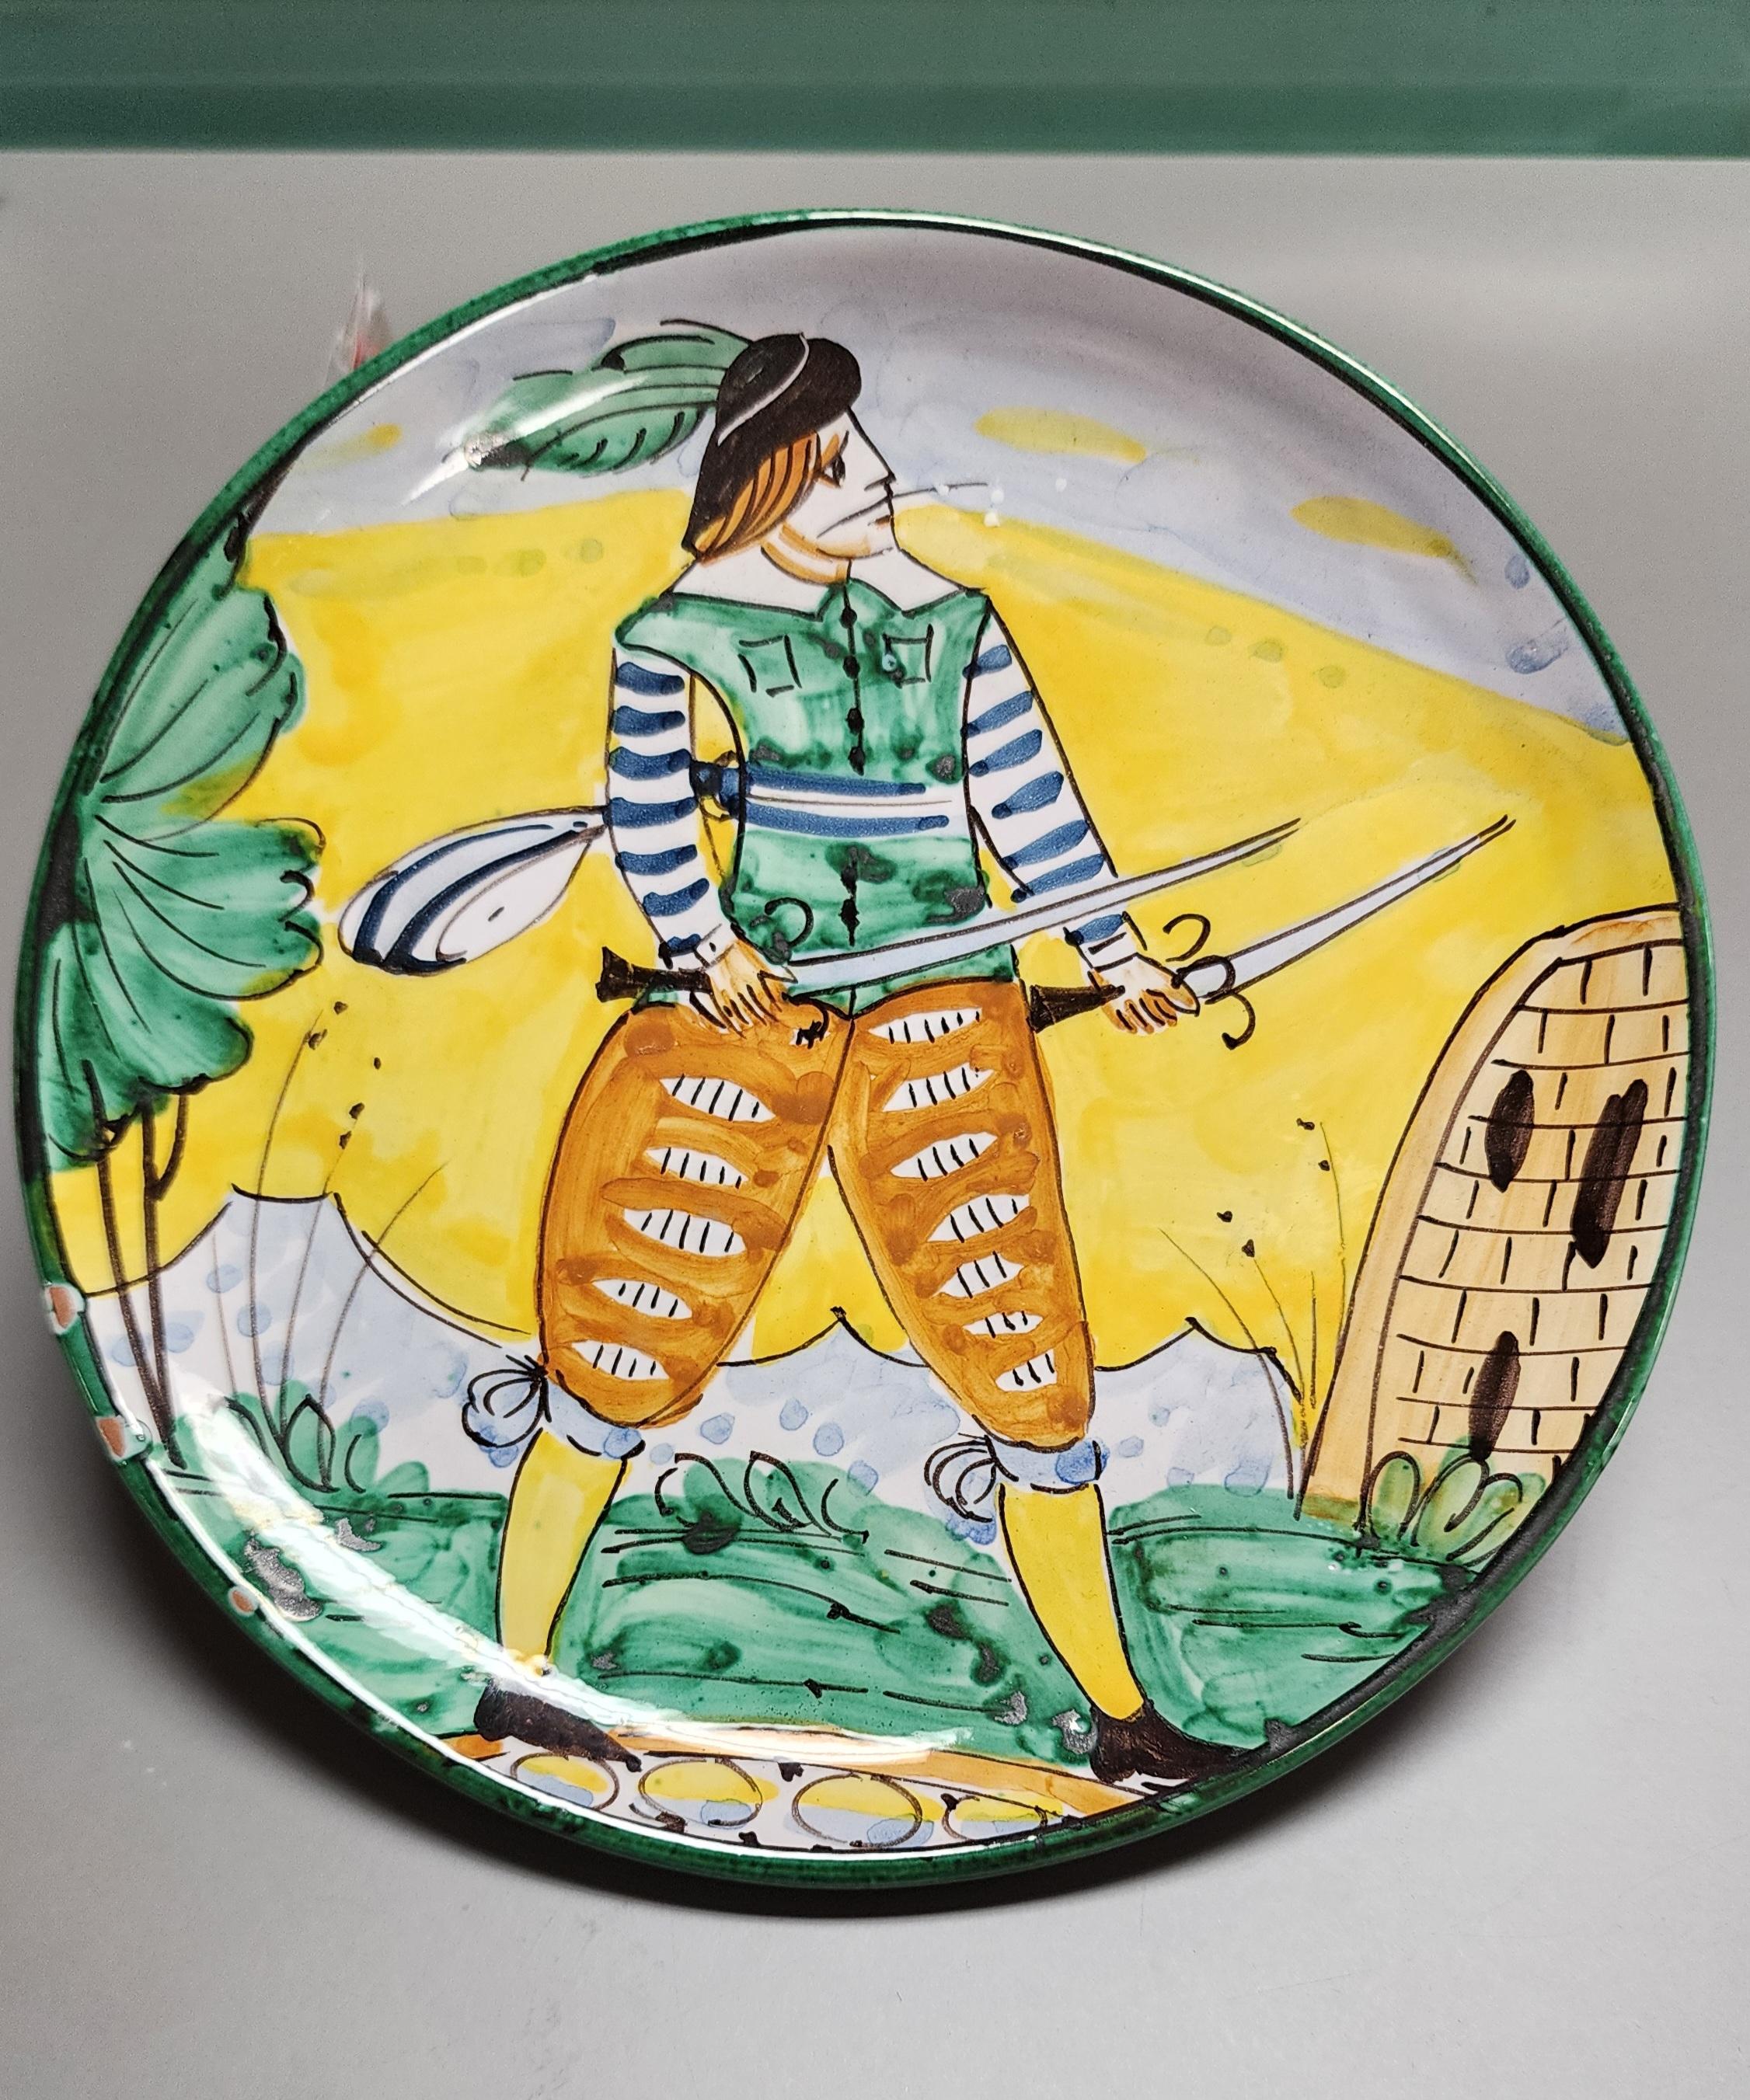 This Italian Pottery plate was made by the famed Bitossi Company. The art is of a soldier in traditional Italian garb wielding two swords. The vivid colors of the clothing along with the vibrant yellow background are typical of this design. 
The